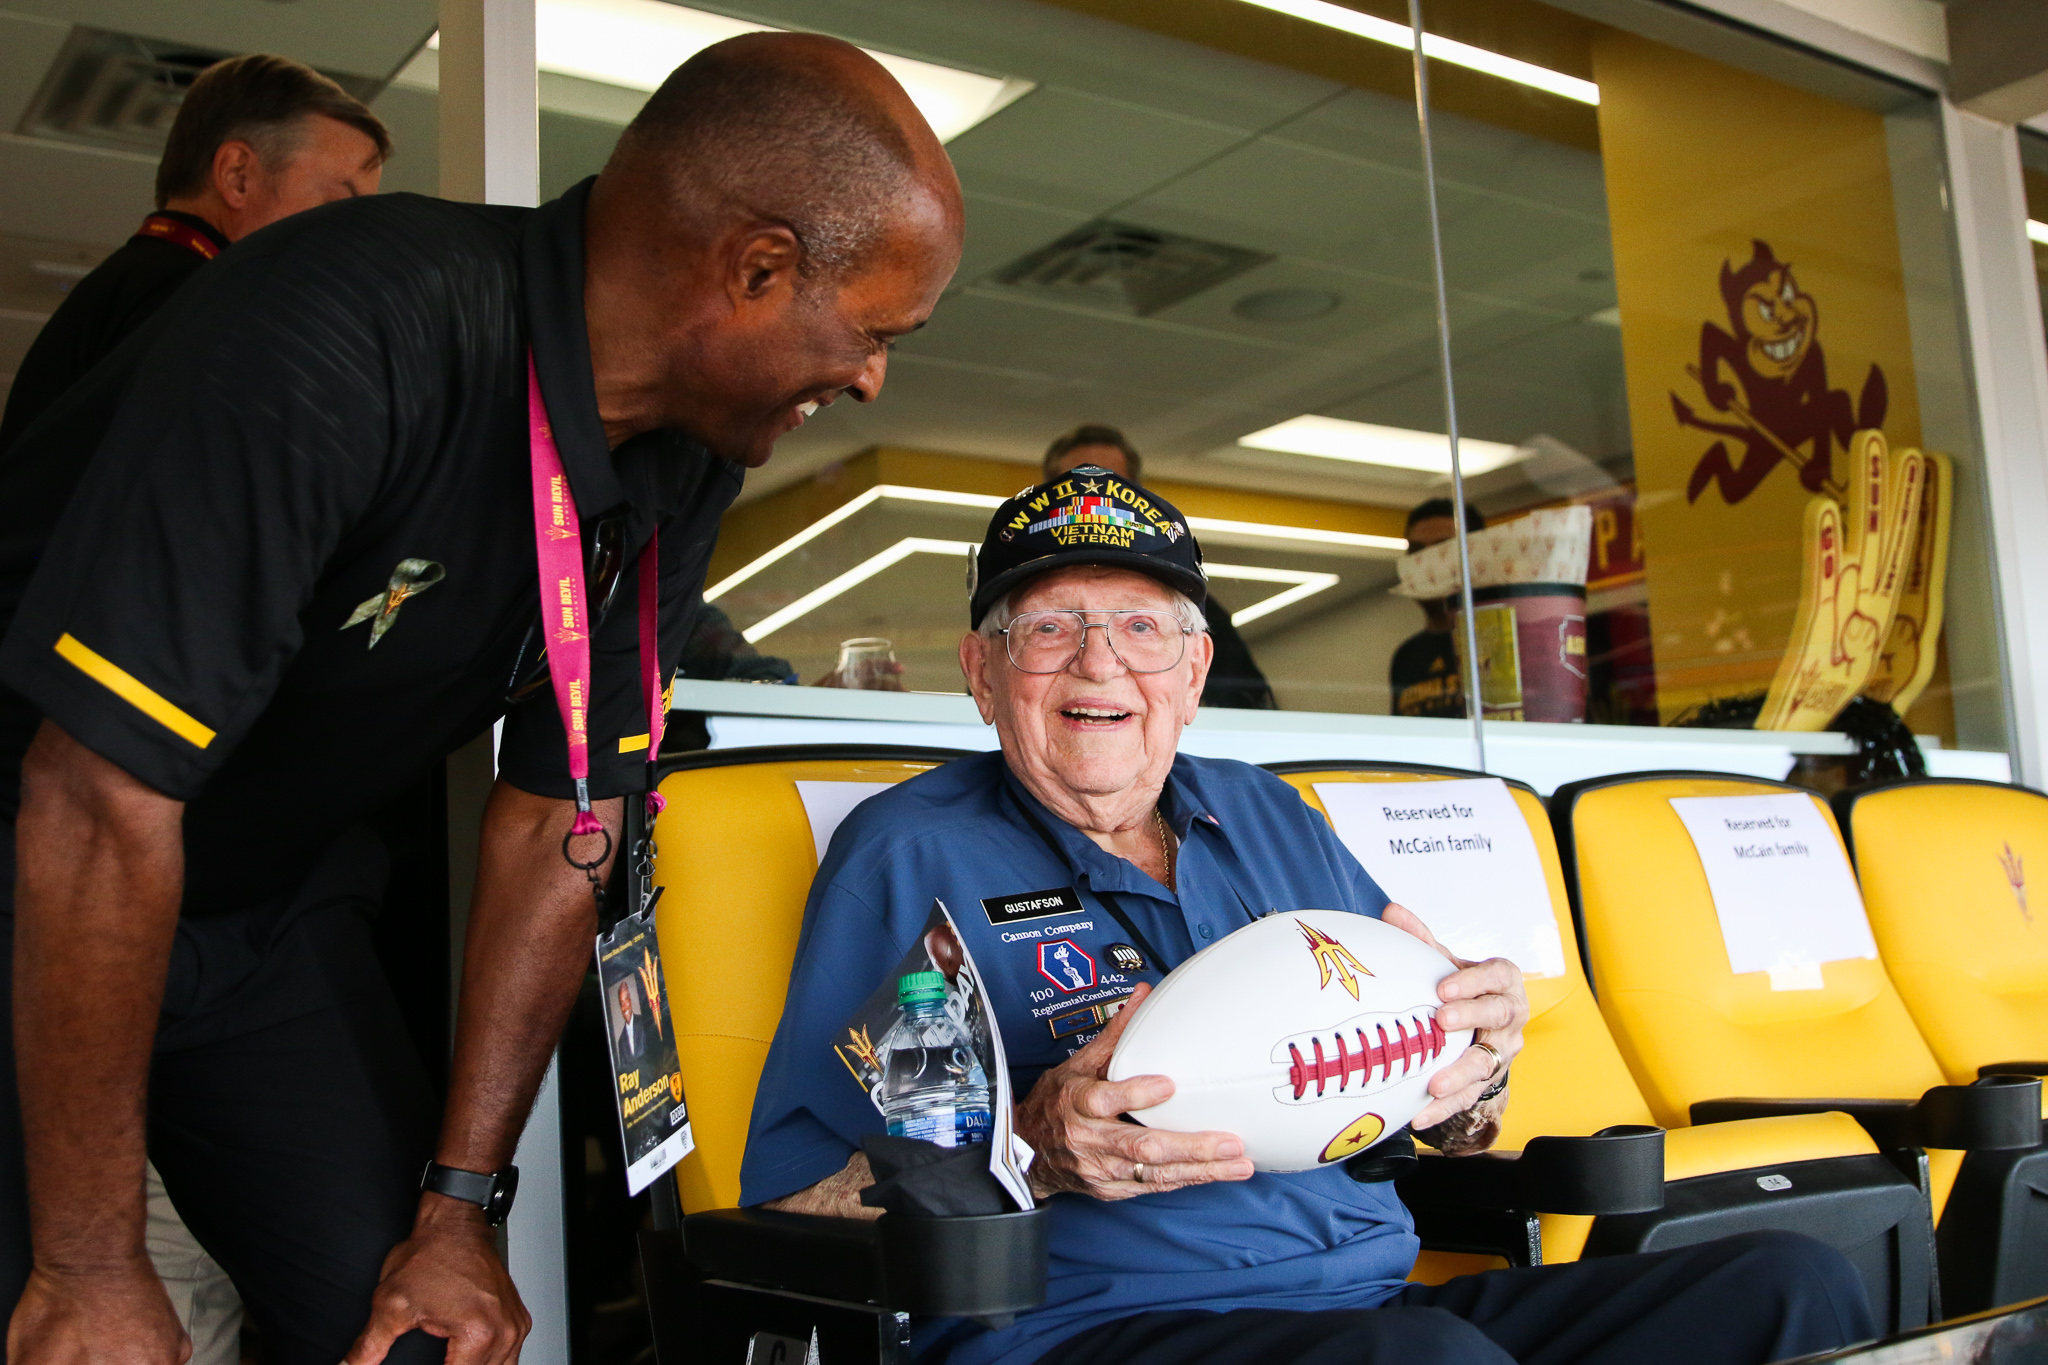 ASU alumnus and veteran Jerry Gustafson is presented with an autographed Herm Edwards football during Salute to Service 